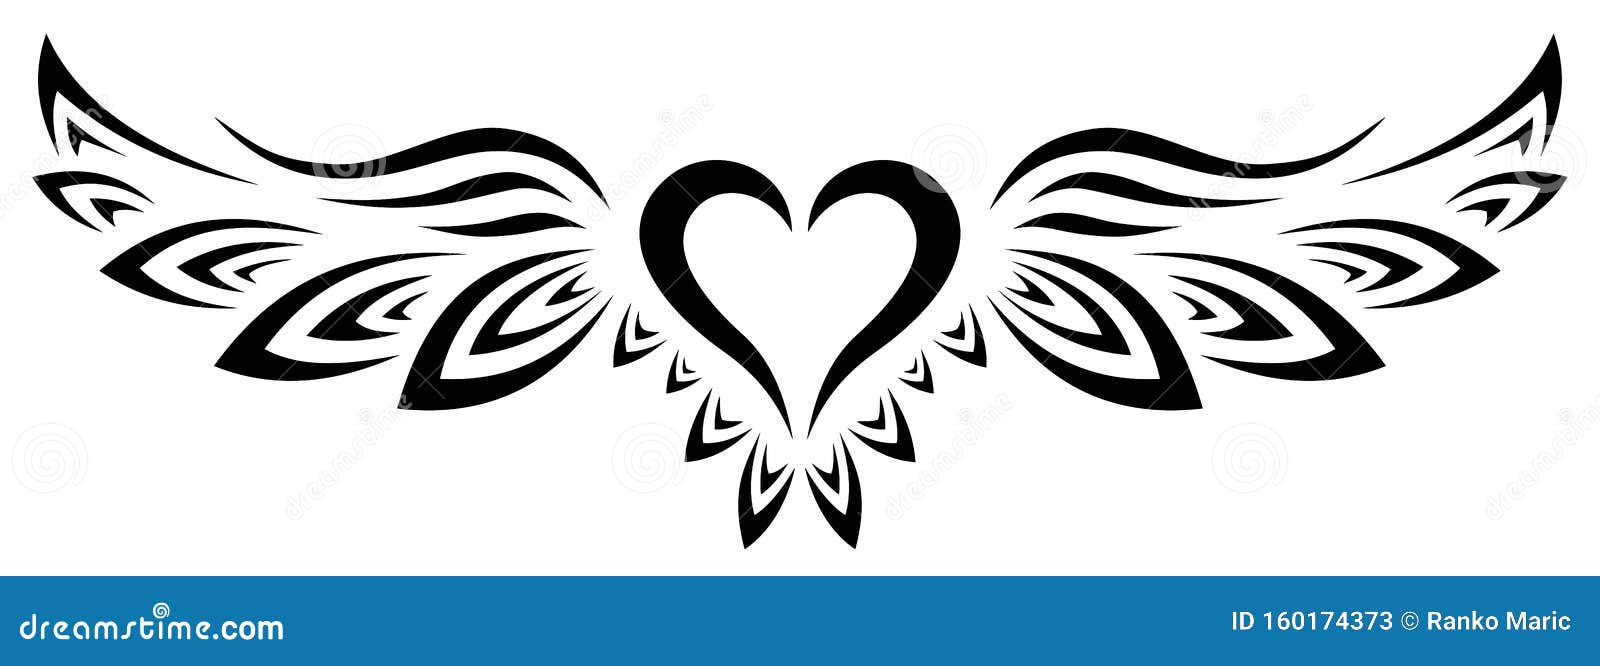 Top 60 Best Heart with Wings Tattoo Ideas  2021 Inspiration Guide